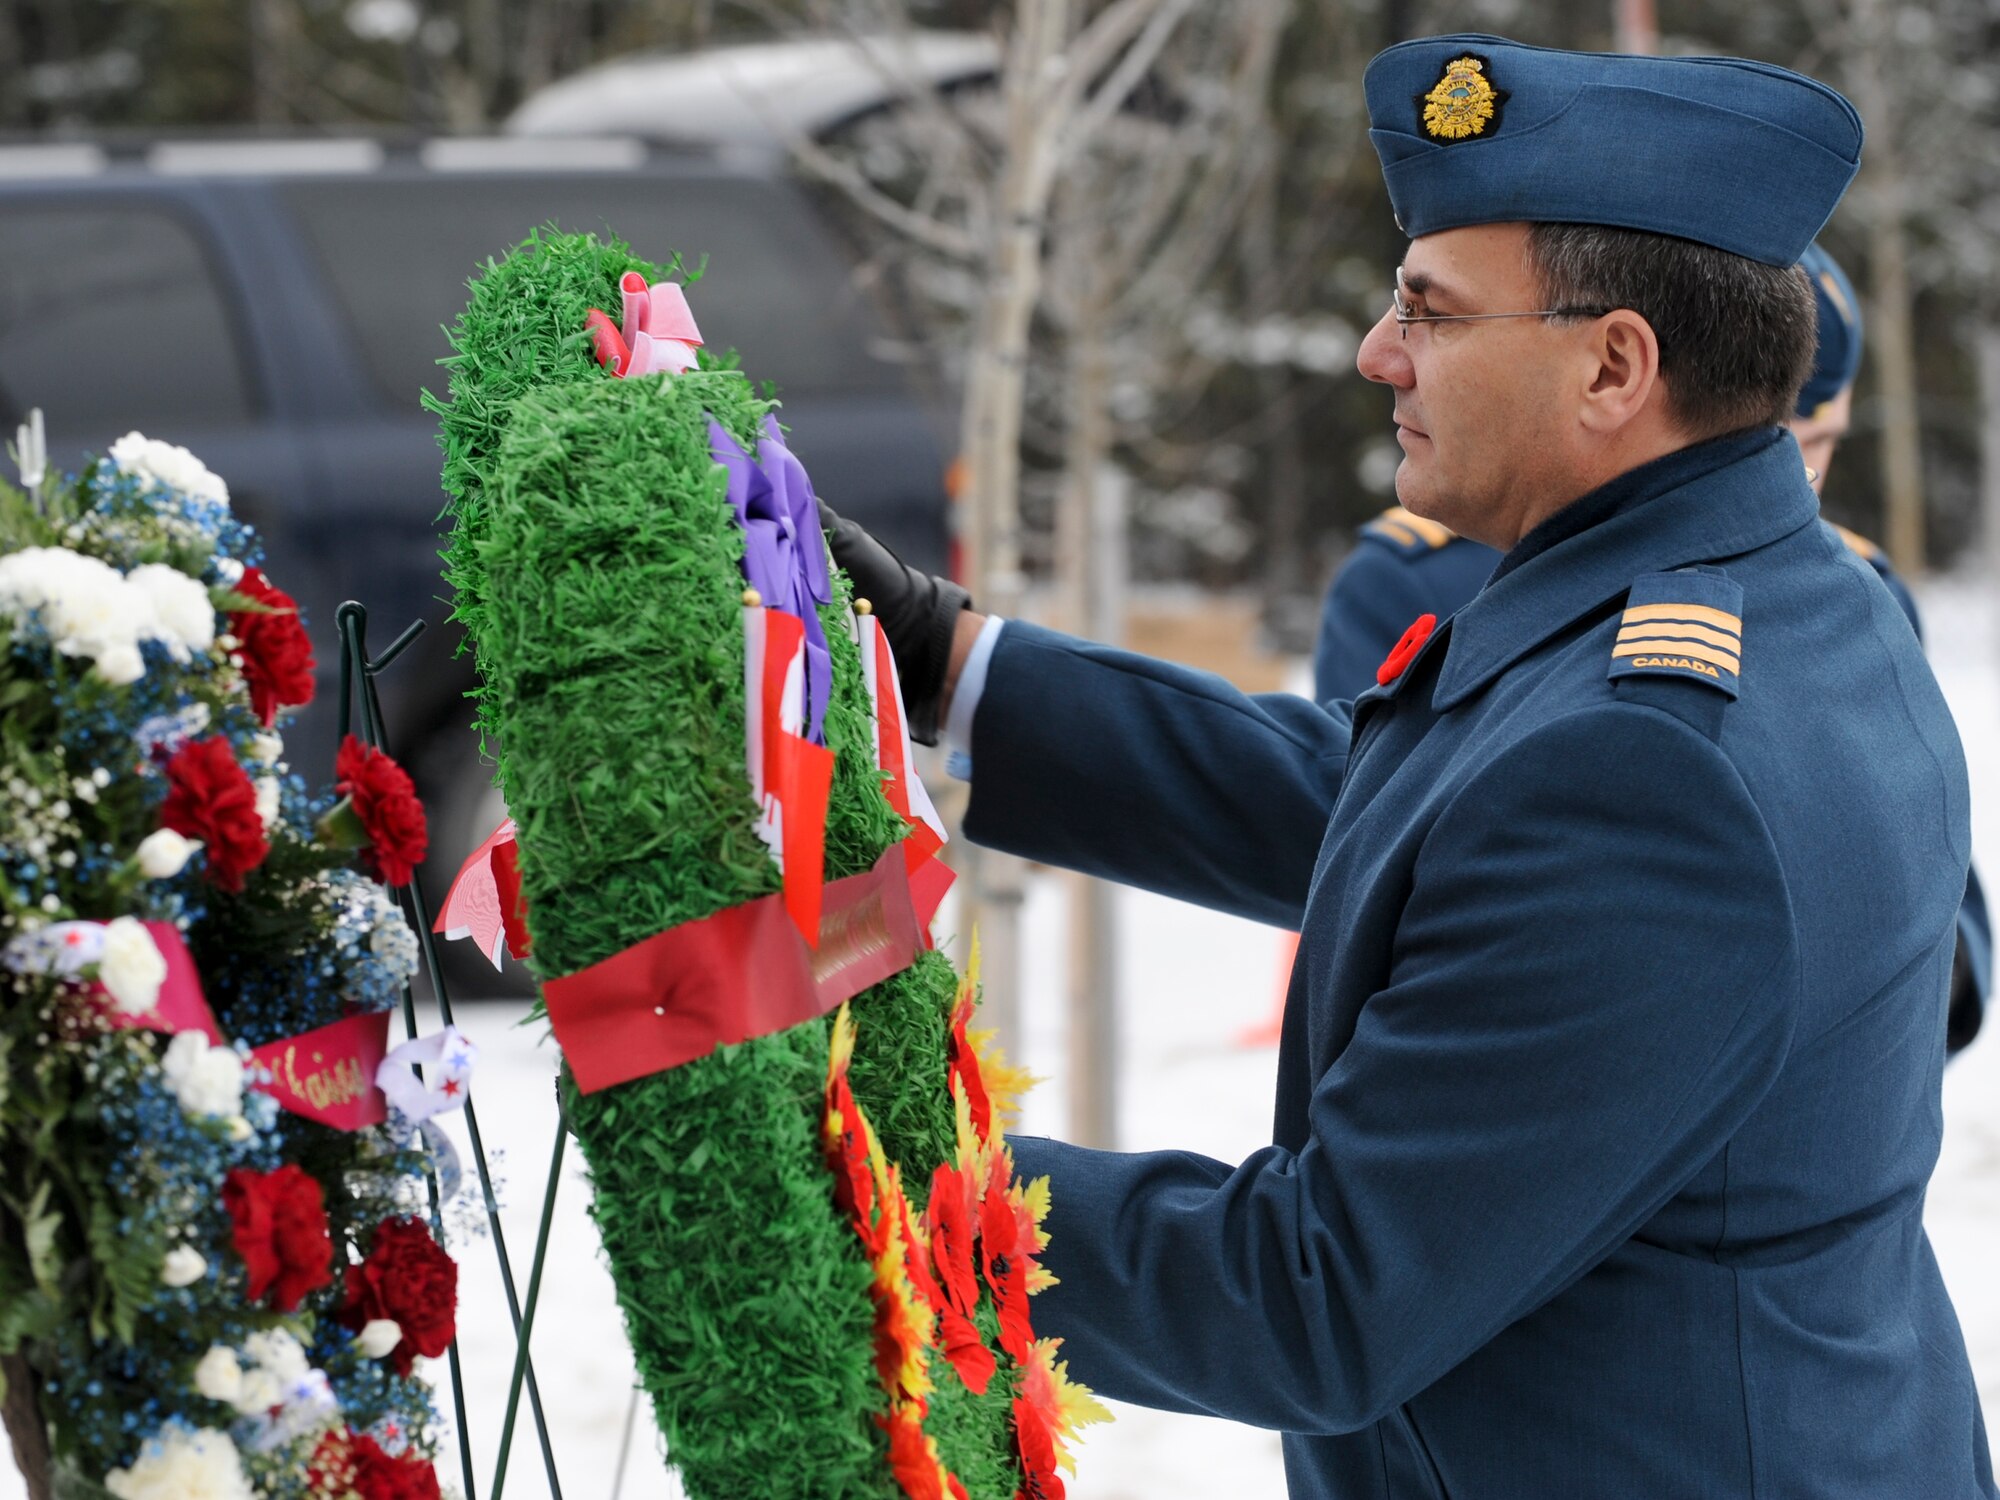 FORT RICHARDSON, Alaska -- Lt. Col. Jim McLean, Canadian Component commanding officer on Elmendorf Air Force Base, places a wreath in honor of fallen warriors during the Veteran Day Memorial Ceremony at Fort Richardson National Cemetery Nov. 11. The ceremony hosted by the Canadian Forces represented all servicemembers who fought in America's past and present wars. (U.S. Air Force photo/Staff Sgt. Joshua Garcia)